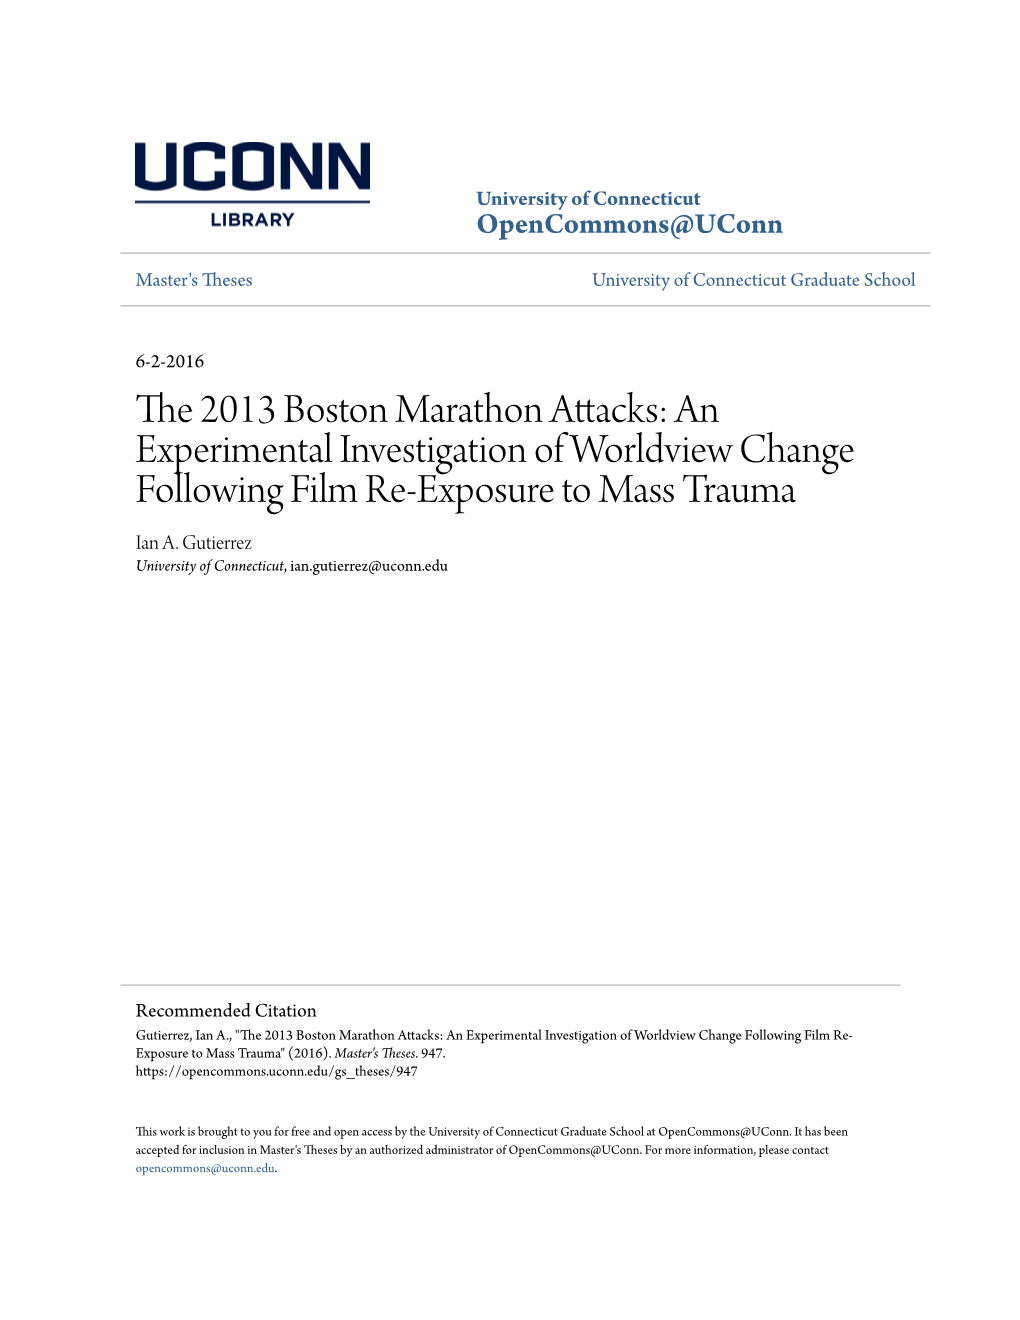 The 2013 Boston Marathon Attacks: an Experimental Investigation of Worldview Change Following Film Re-Exposure to Mass Trauma Ian A